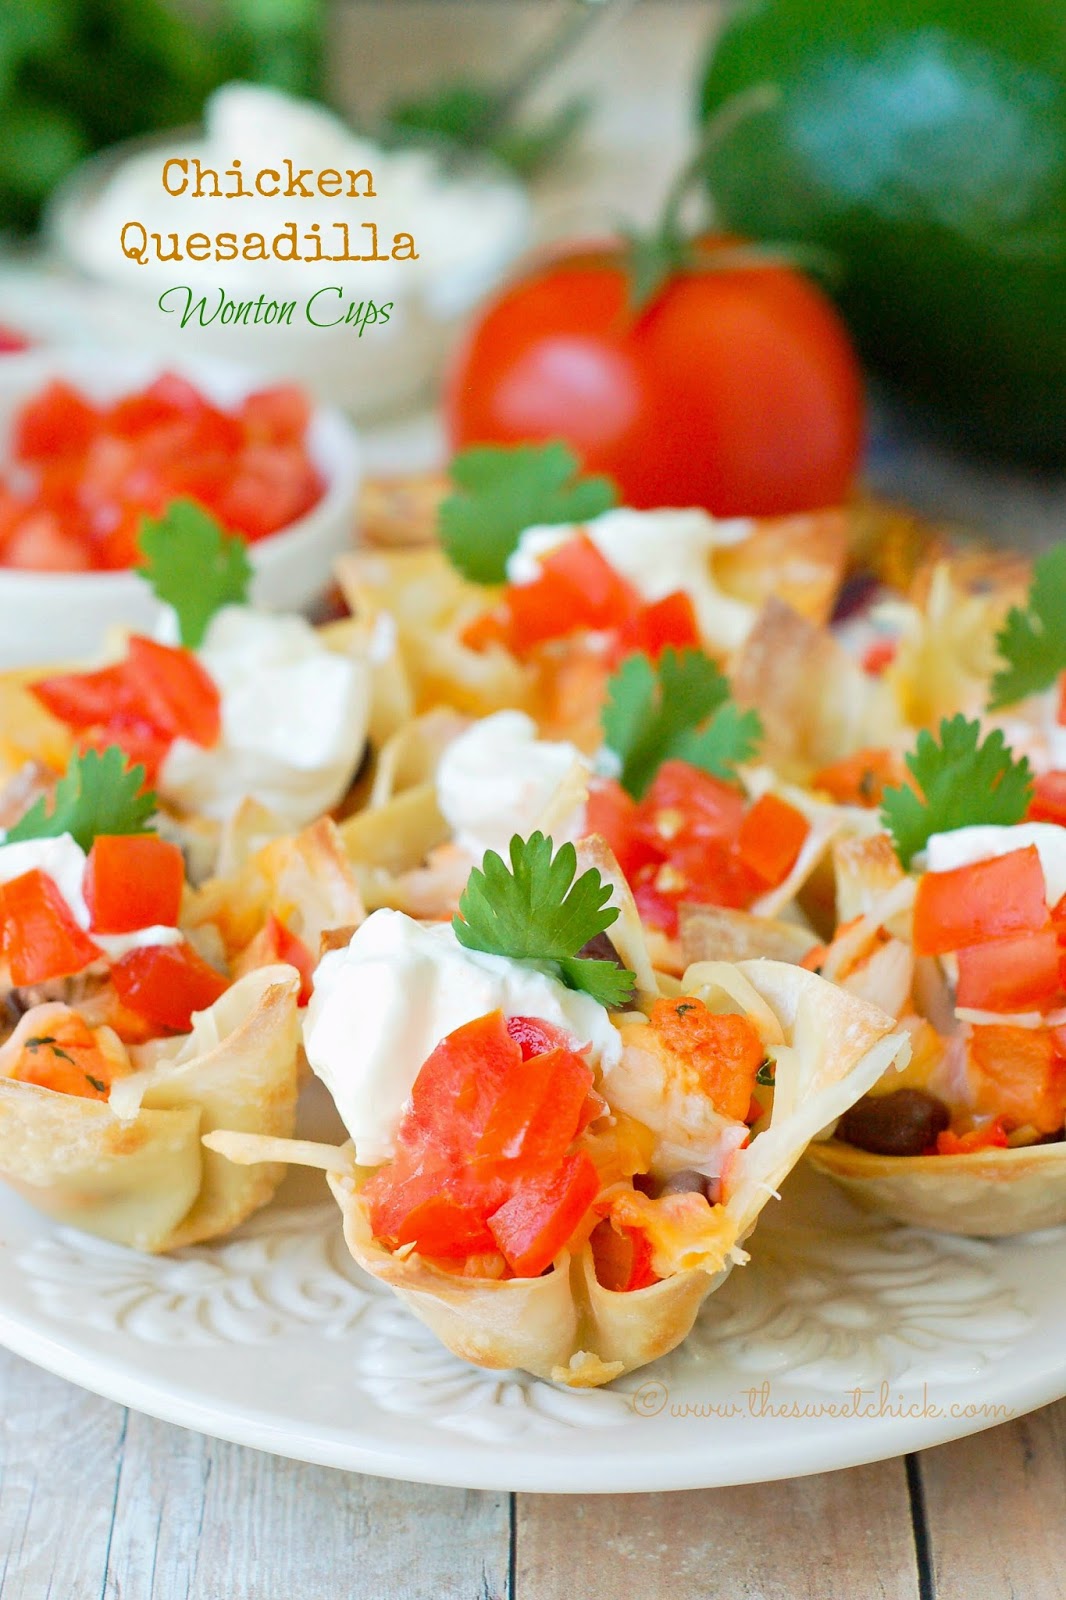 Chicken Quesadilla Wonton Cups by The Sweet Chick